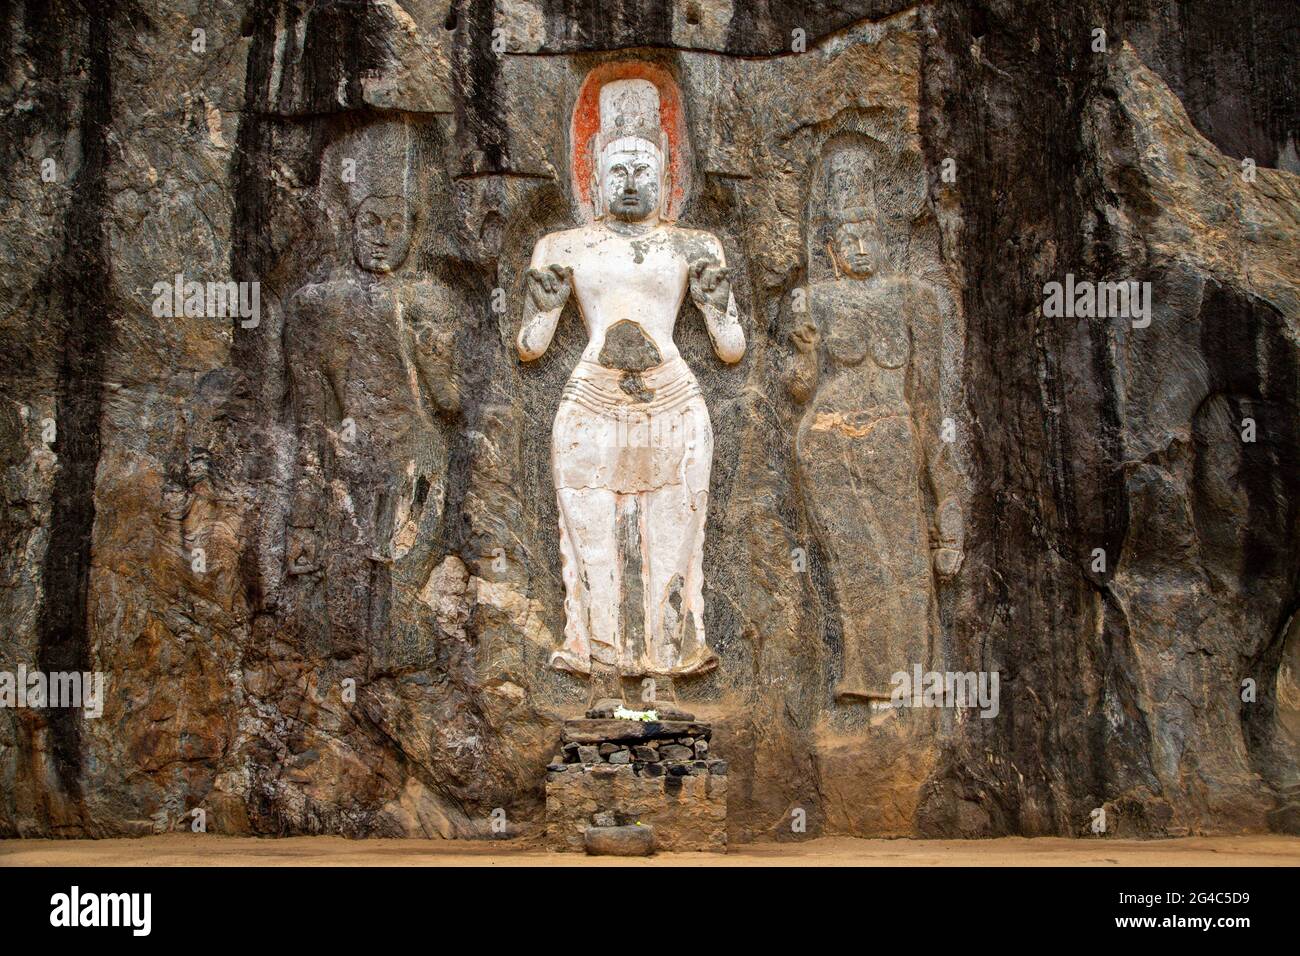 Antique Buddha reliefs carved out on the rock in Buduruwagala, Sri Lanka Stock Photo